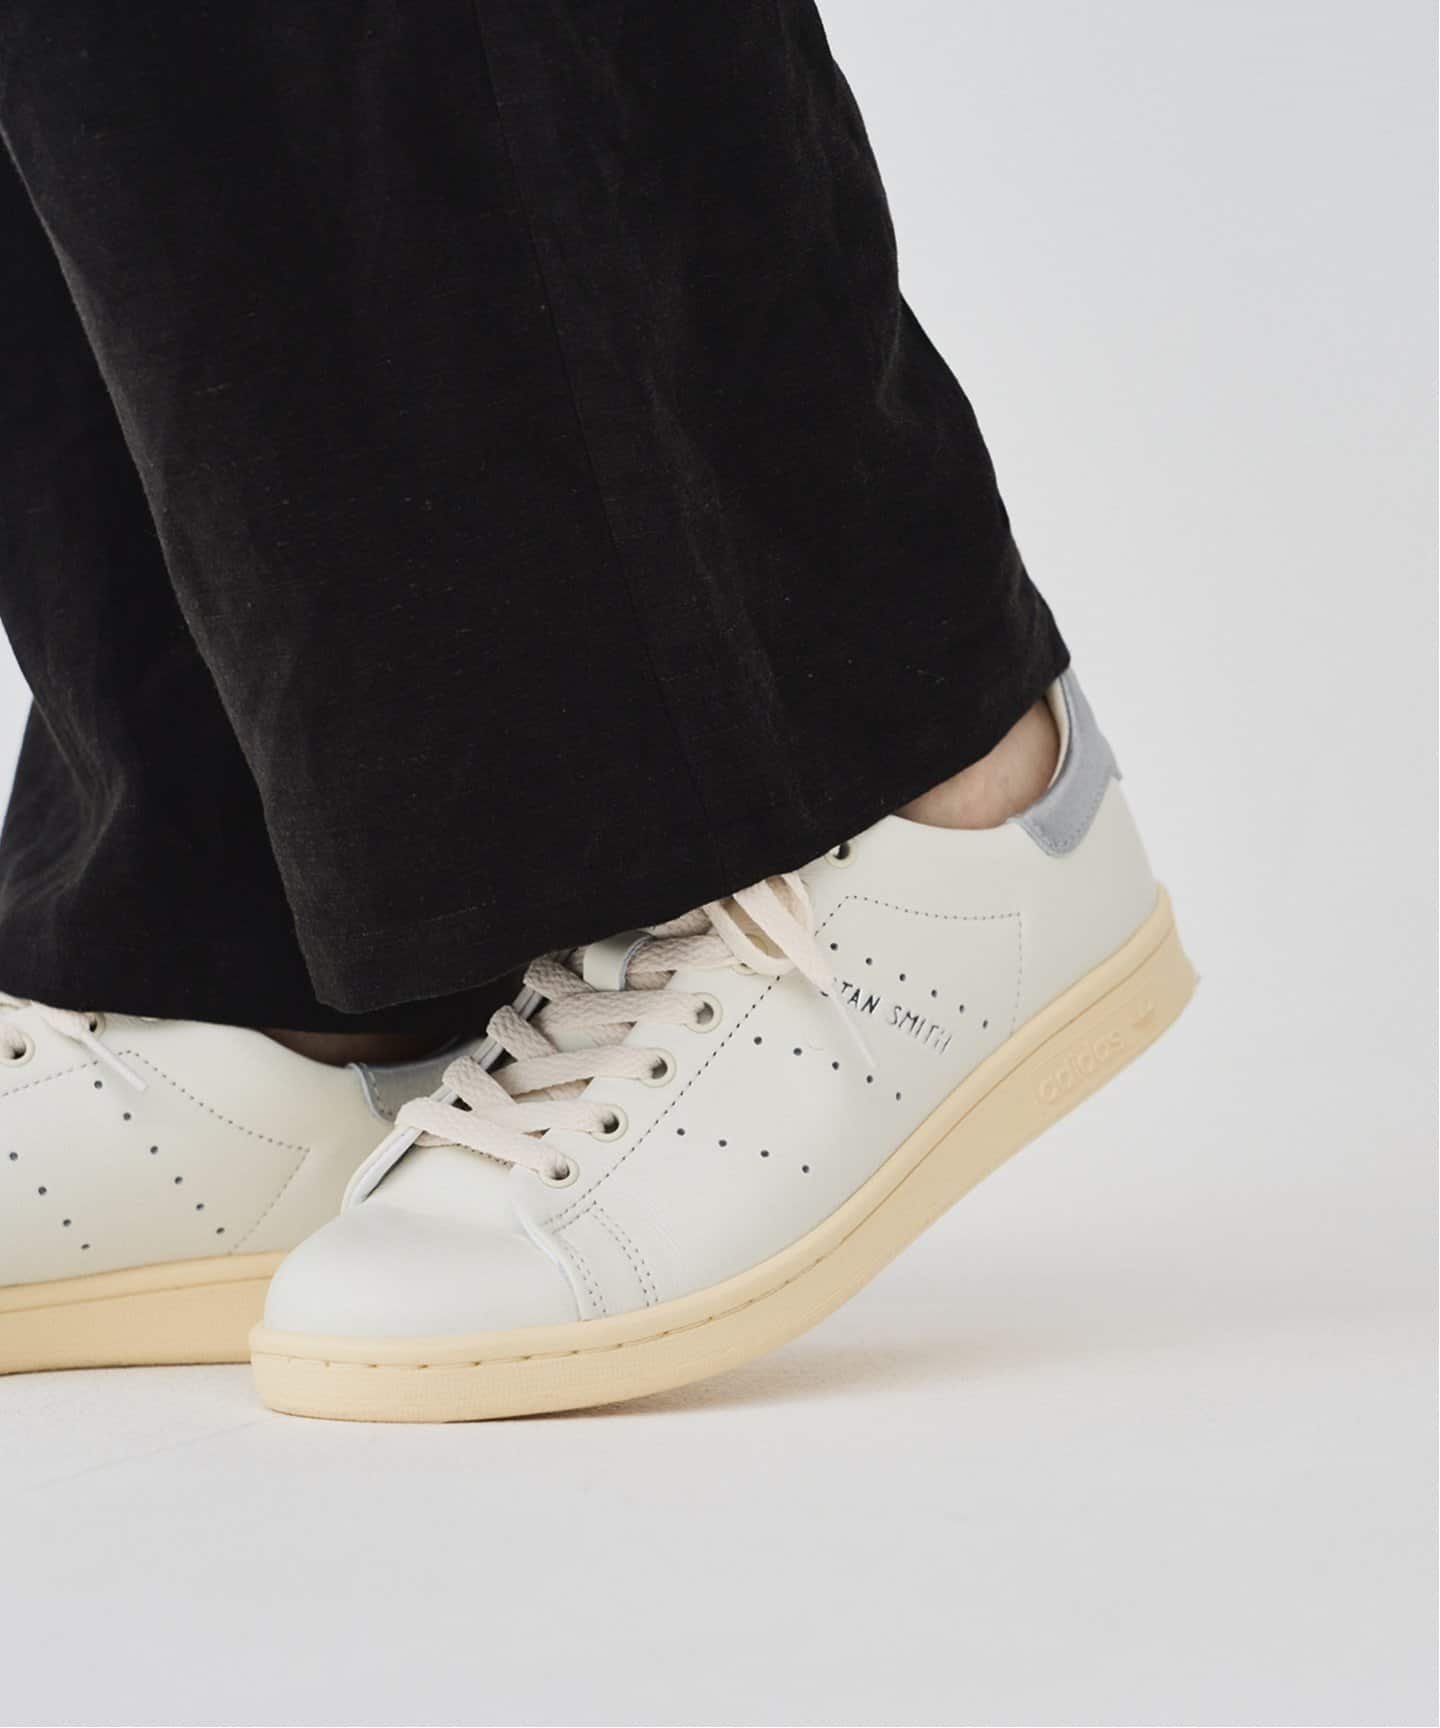 IENA adidas Originals for EDIFICE/IENA 別注 STANSMITH LUX Exclusiveモデル イエナ シューズ・靴 スニーカー ブラウン